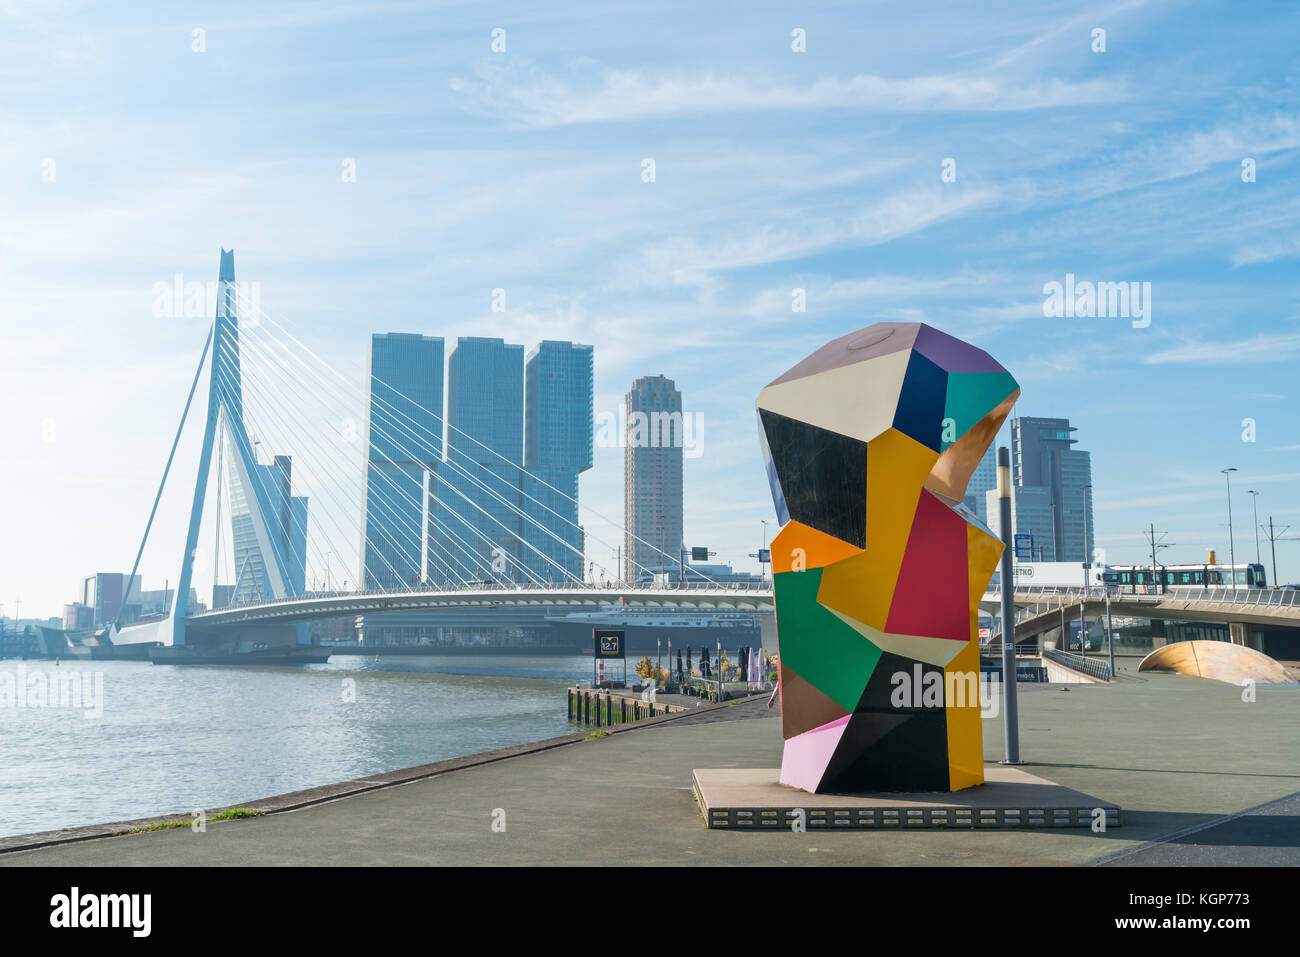 ROTTERDAM, HOLLAND -AUGUST 22, 2017; Multi-colored cubic sculpture Marathon Image in Erasmuburg district with city's stunning modern architectural bui Stock Photo